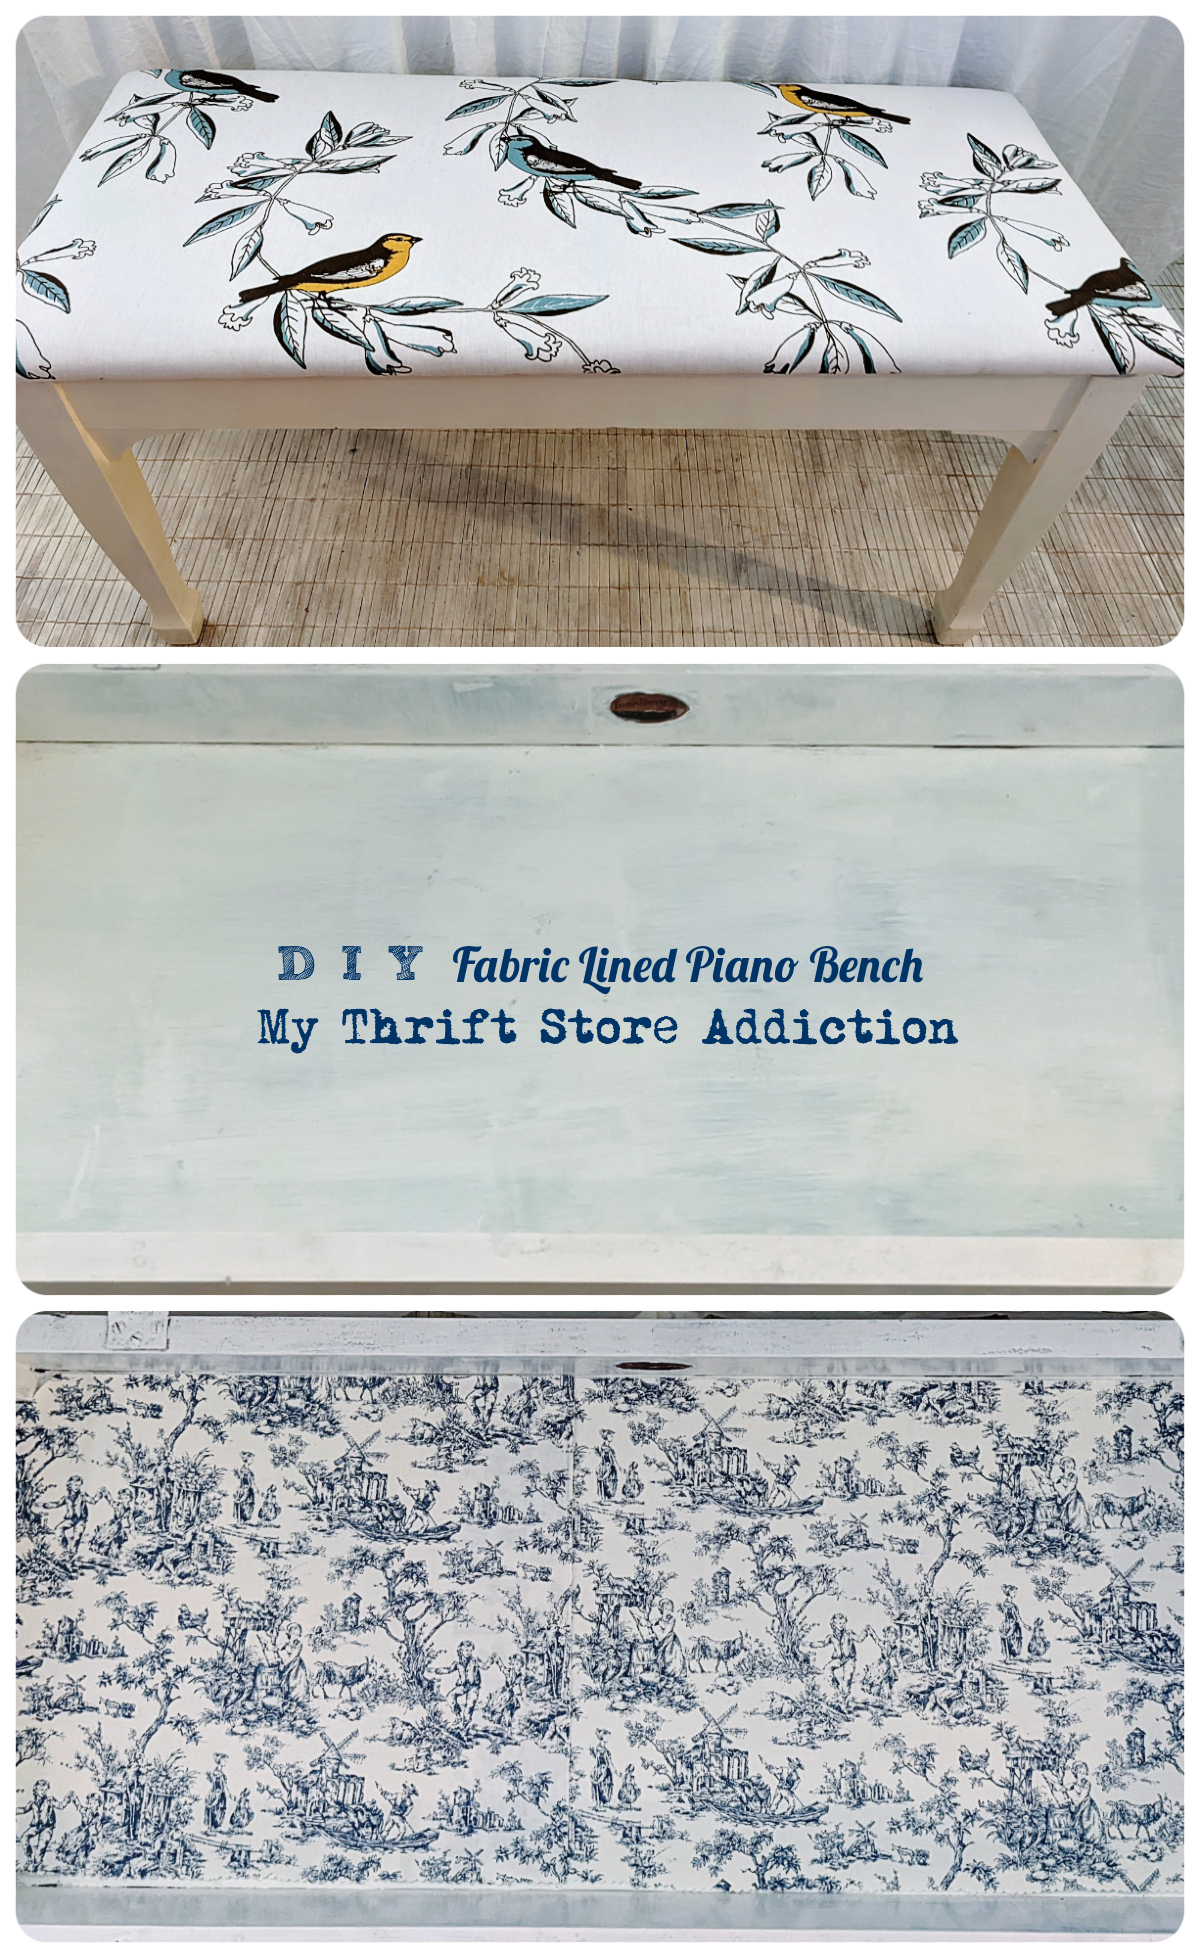 DIY fabric lined piano bench